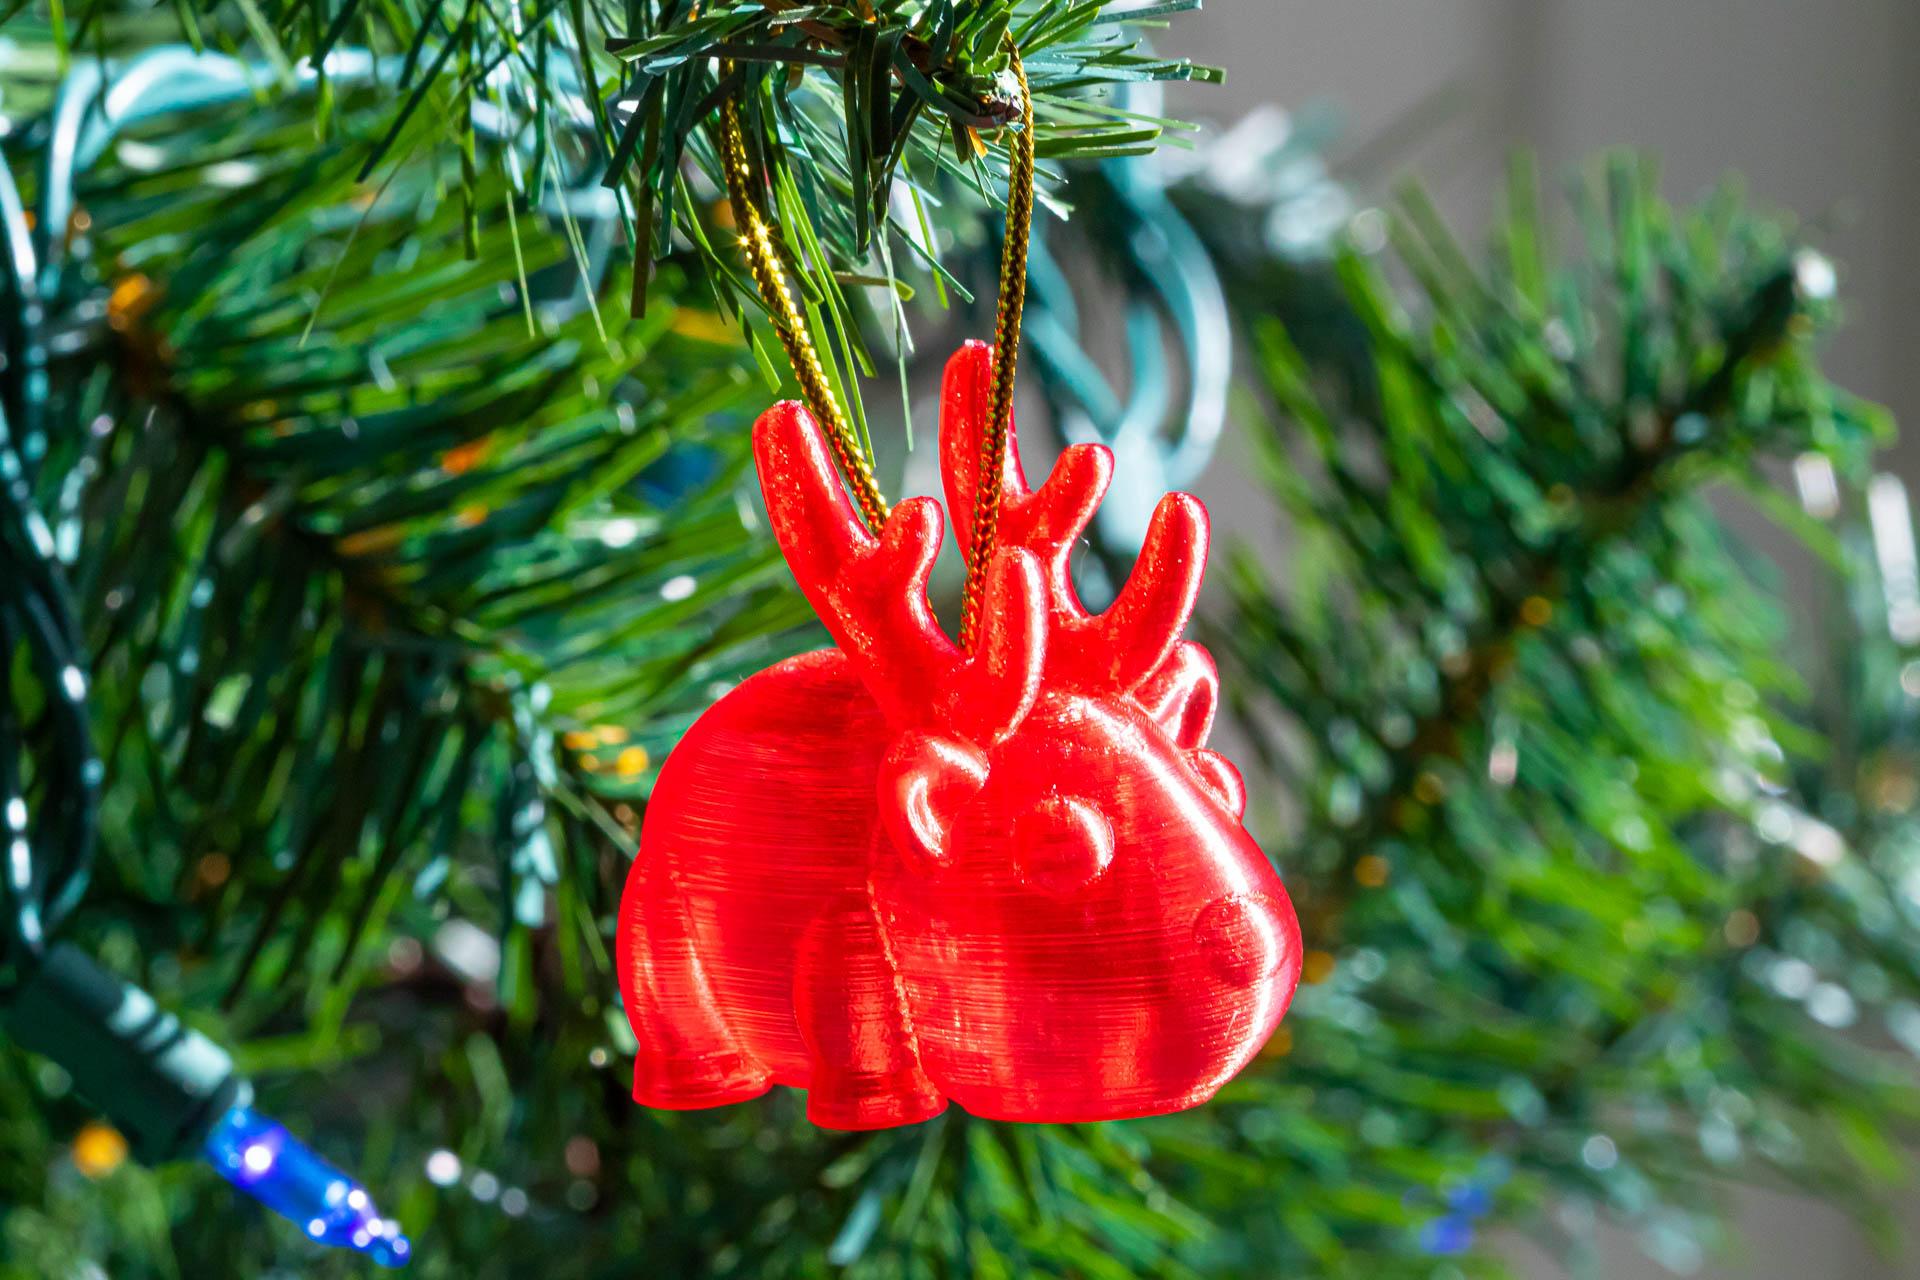 Small Reindeer Ornament - A huge thanks to BuildOverBot for posting this wonderful design! It printed beautifully on the first try and only took about 40 minutes to print.

Printed using Matterhackers Translucent Red PLA.

Walls are 1 line thick (0.4 mm) to maximize transparency. 

Layers are 0.15 mm.

I repurposed the gold thread from a set of package labels. - 3d model